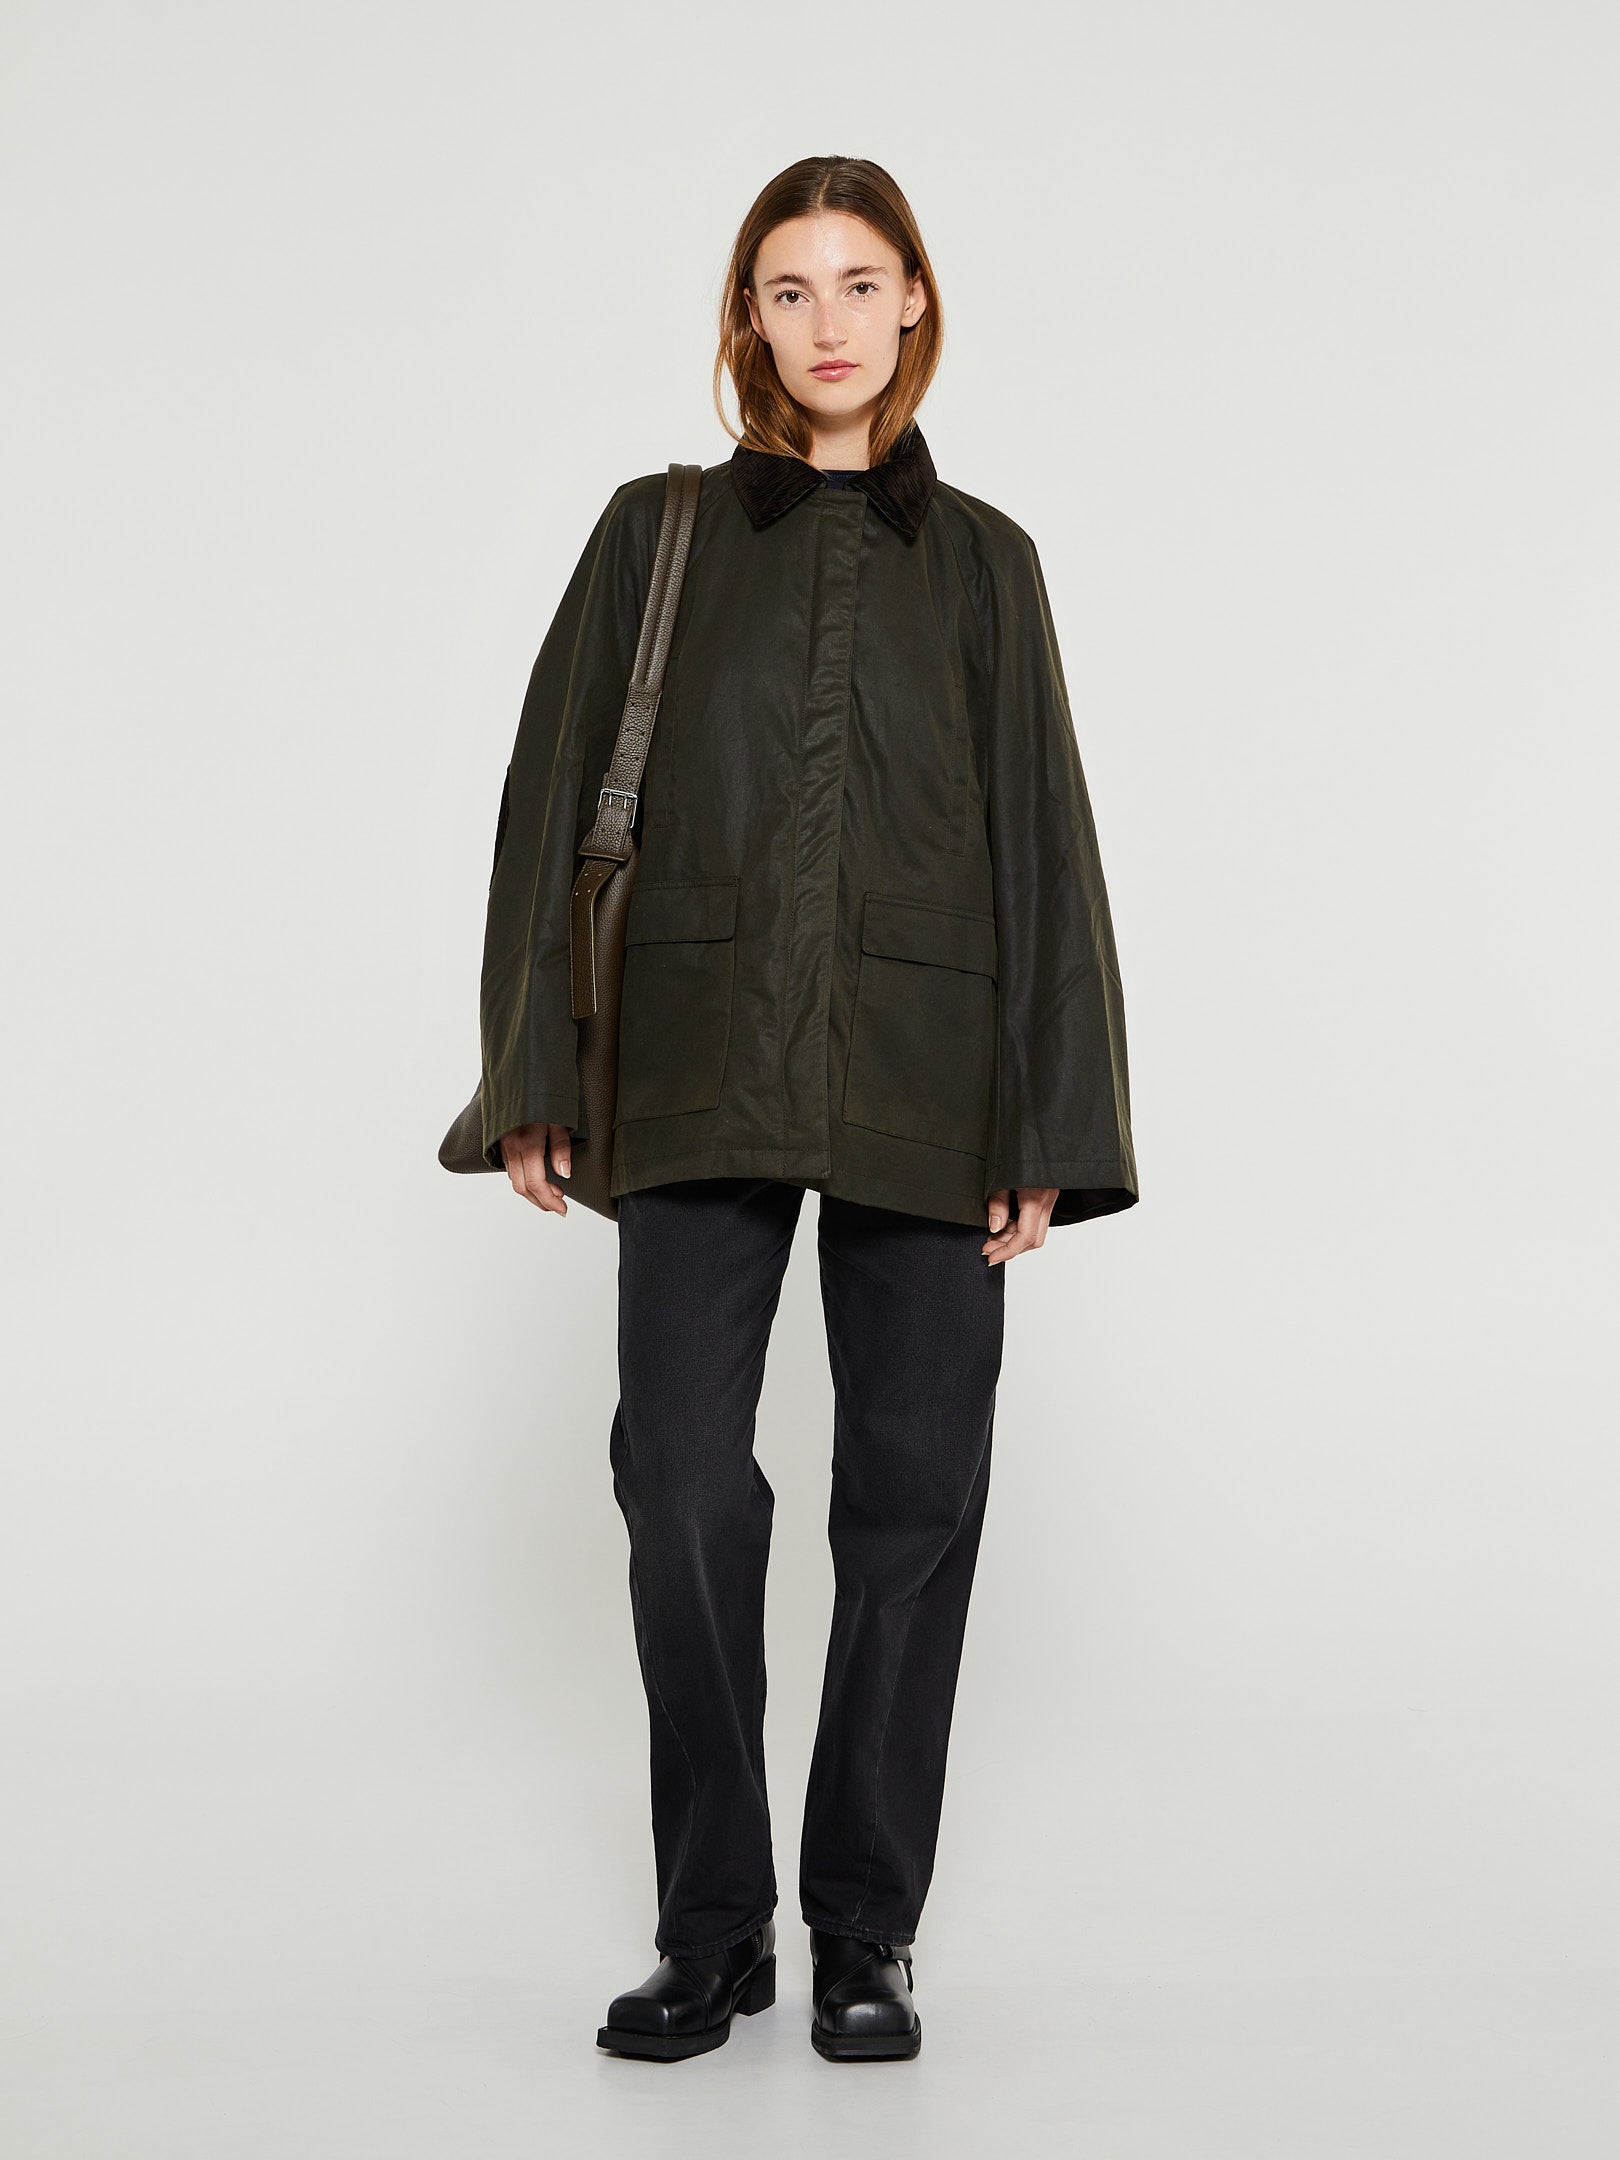 selection for women at Jackets Shop & stoy | Coats the